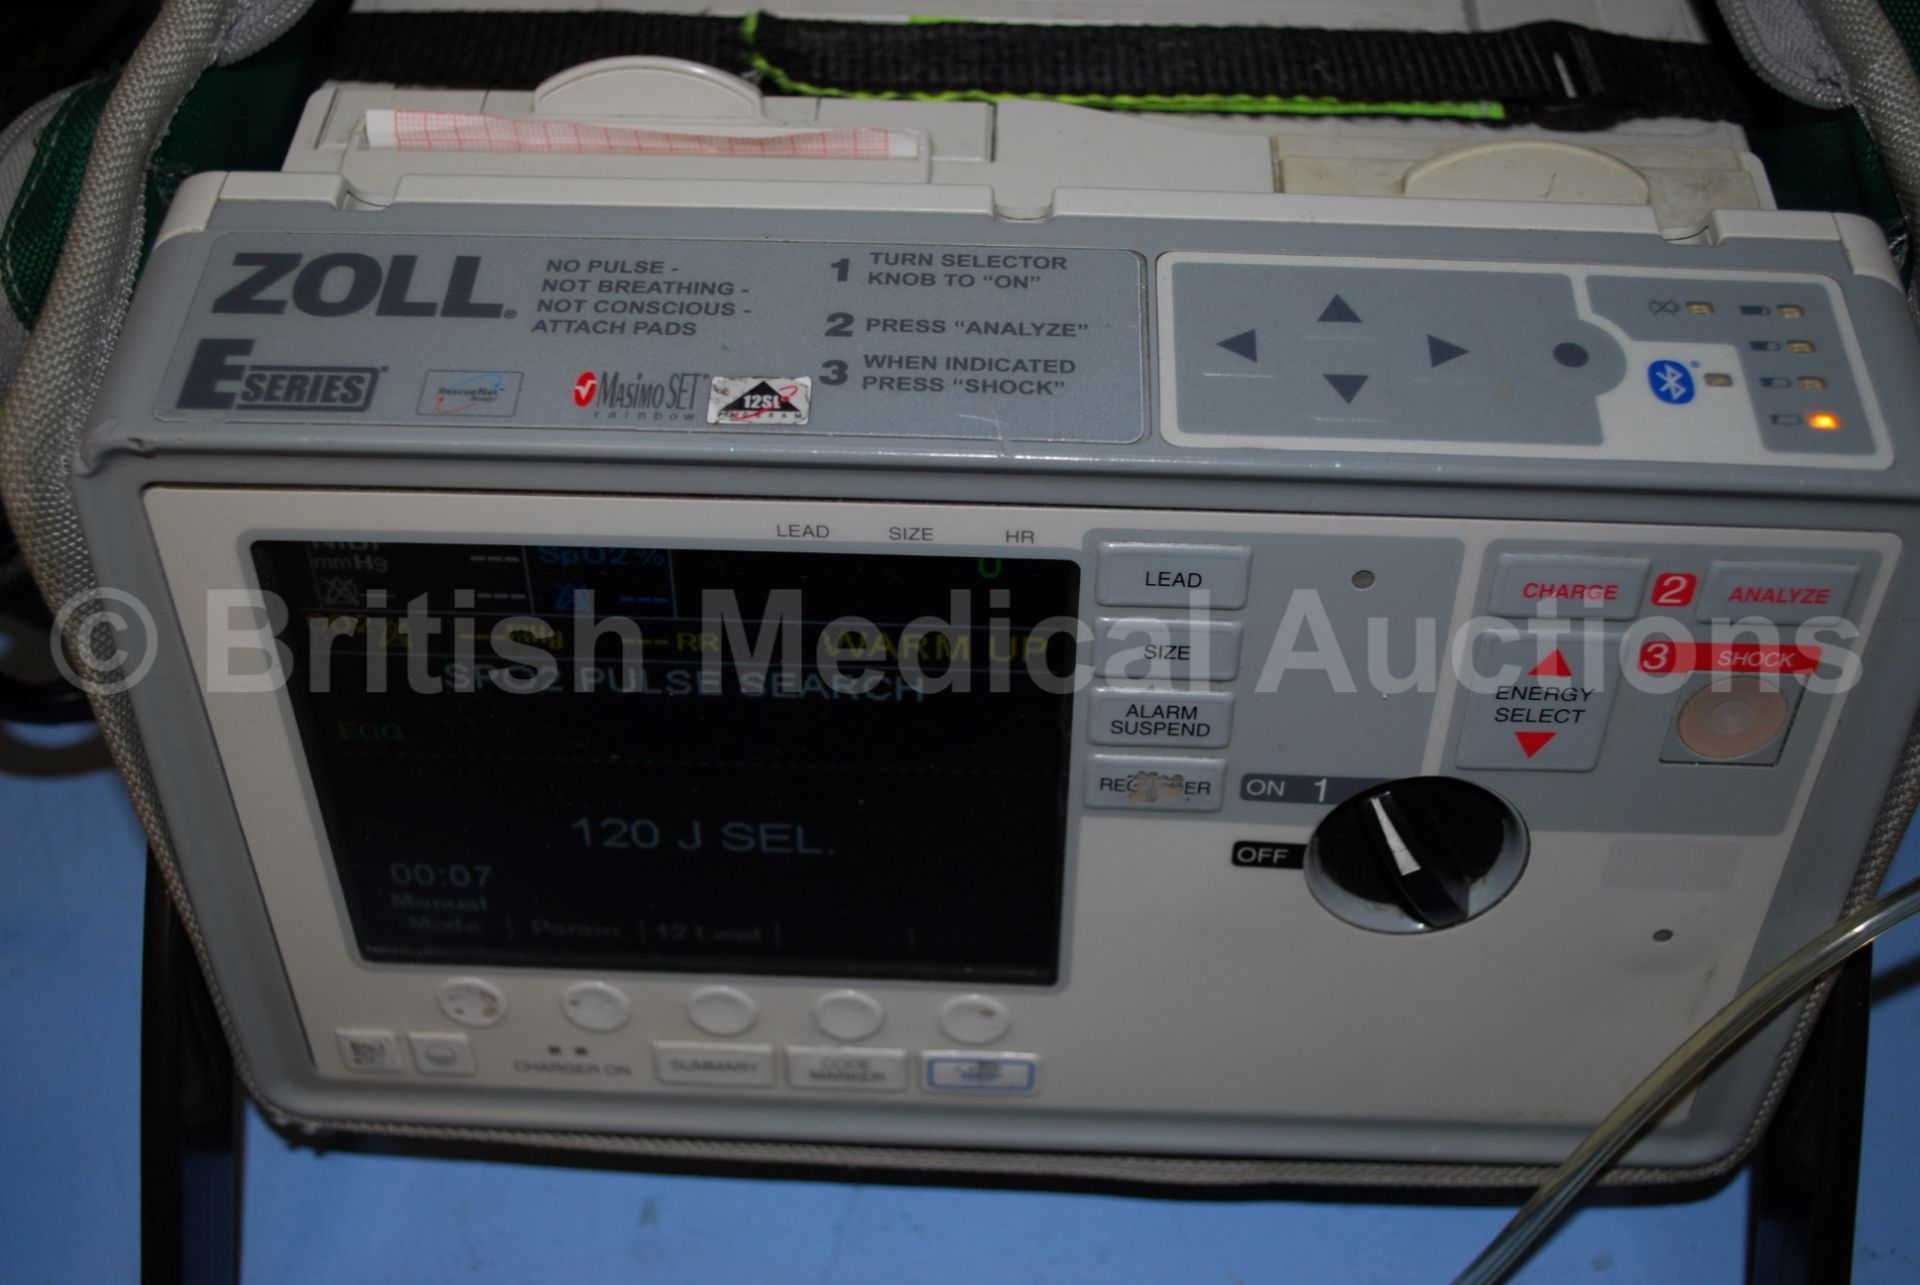 Zoll E Series Defibrillator with Bluetooth, ECG, S - Image 3 of 5